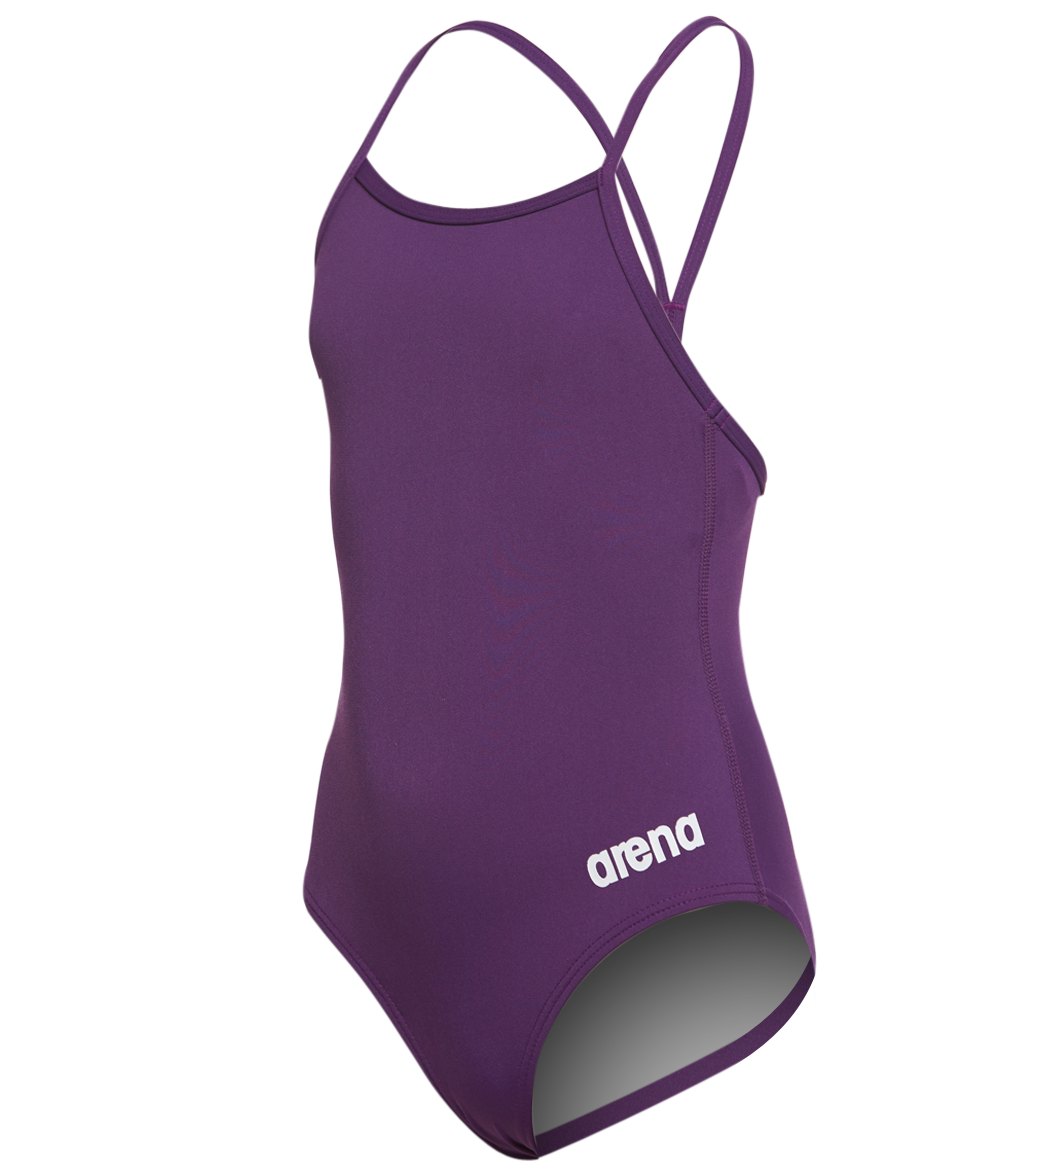 Arena Girls' Master Maxlife Thin Strap Micro Back One Piece Swimsuit - Plum/White 6Y/22 Polyester/Pbt - Swimoutlet.com